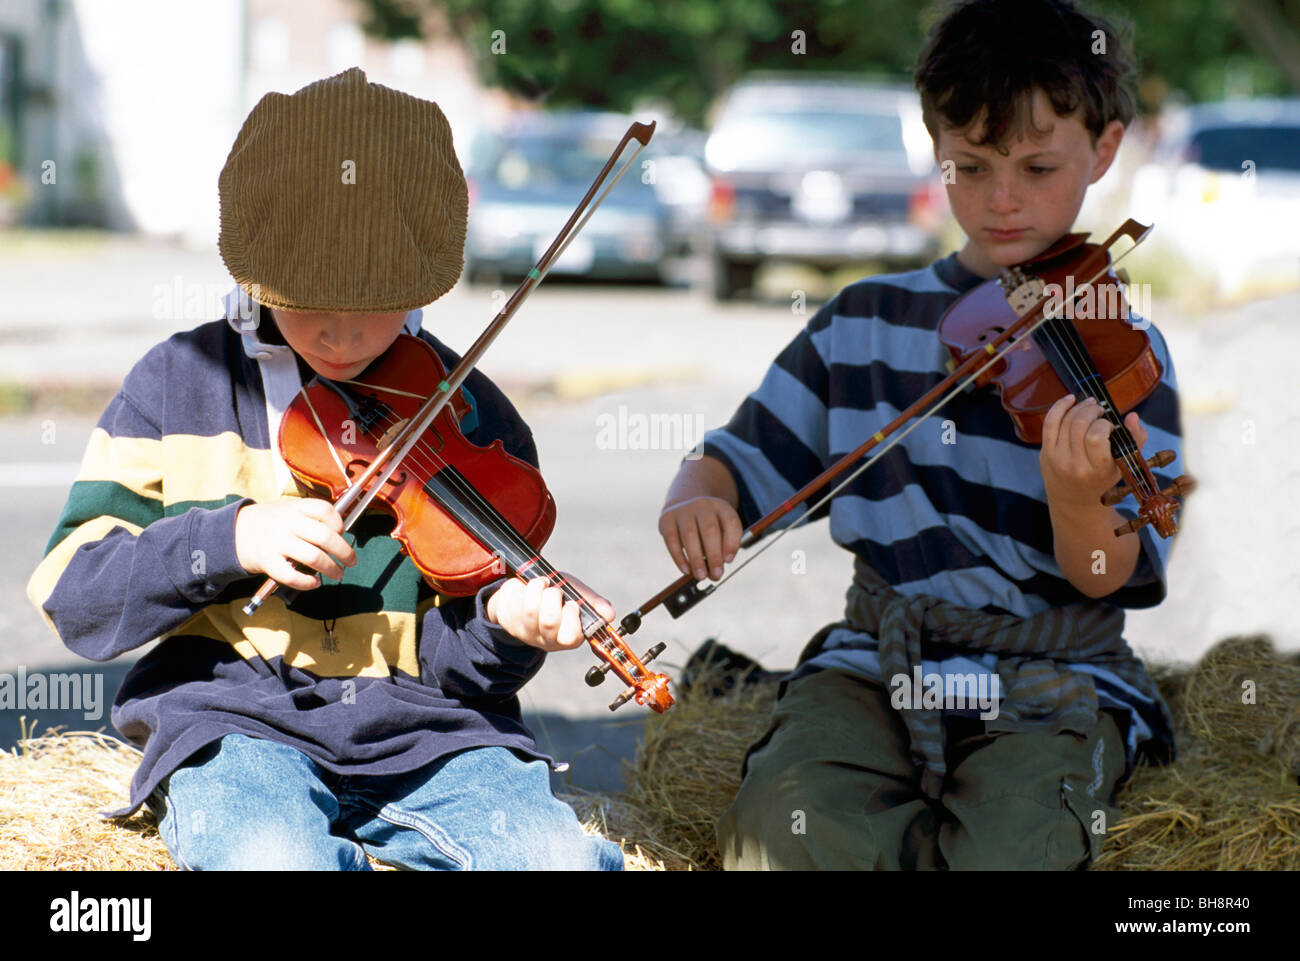 Young Boys playing Violin Fiddle Music, Children Fiddler Musicians Players at Farm Fair, Port Townsend, Washington State, USA Stock Photo